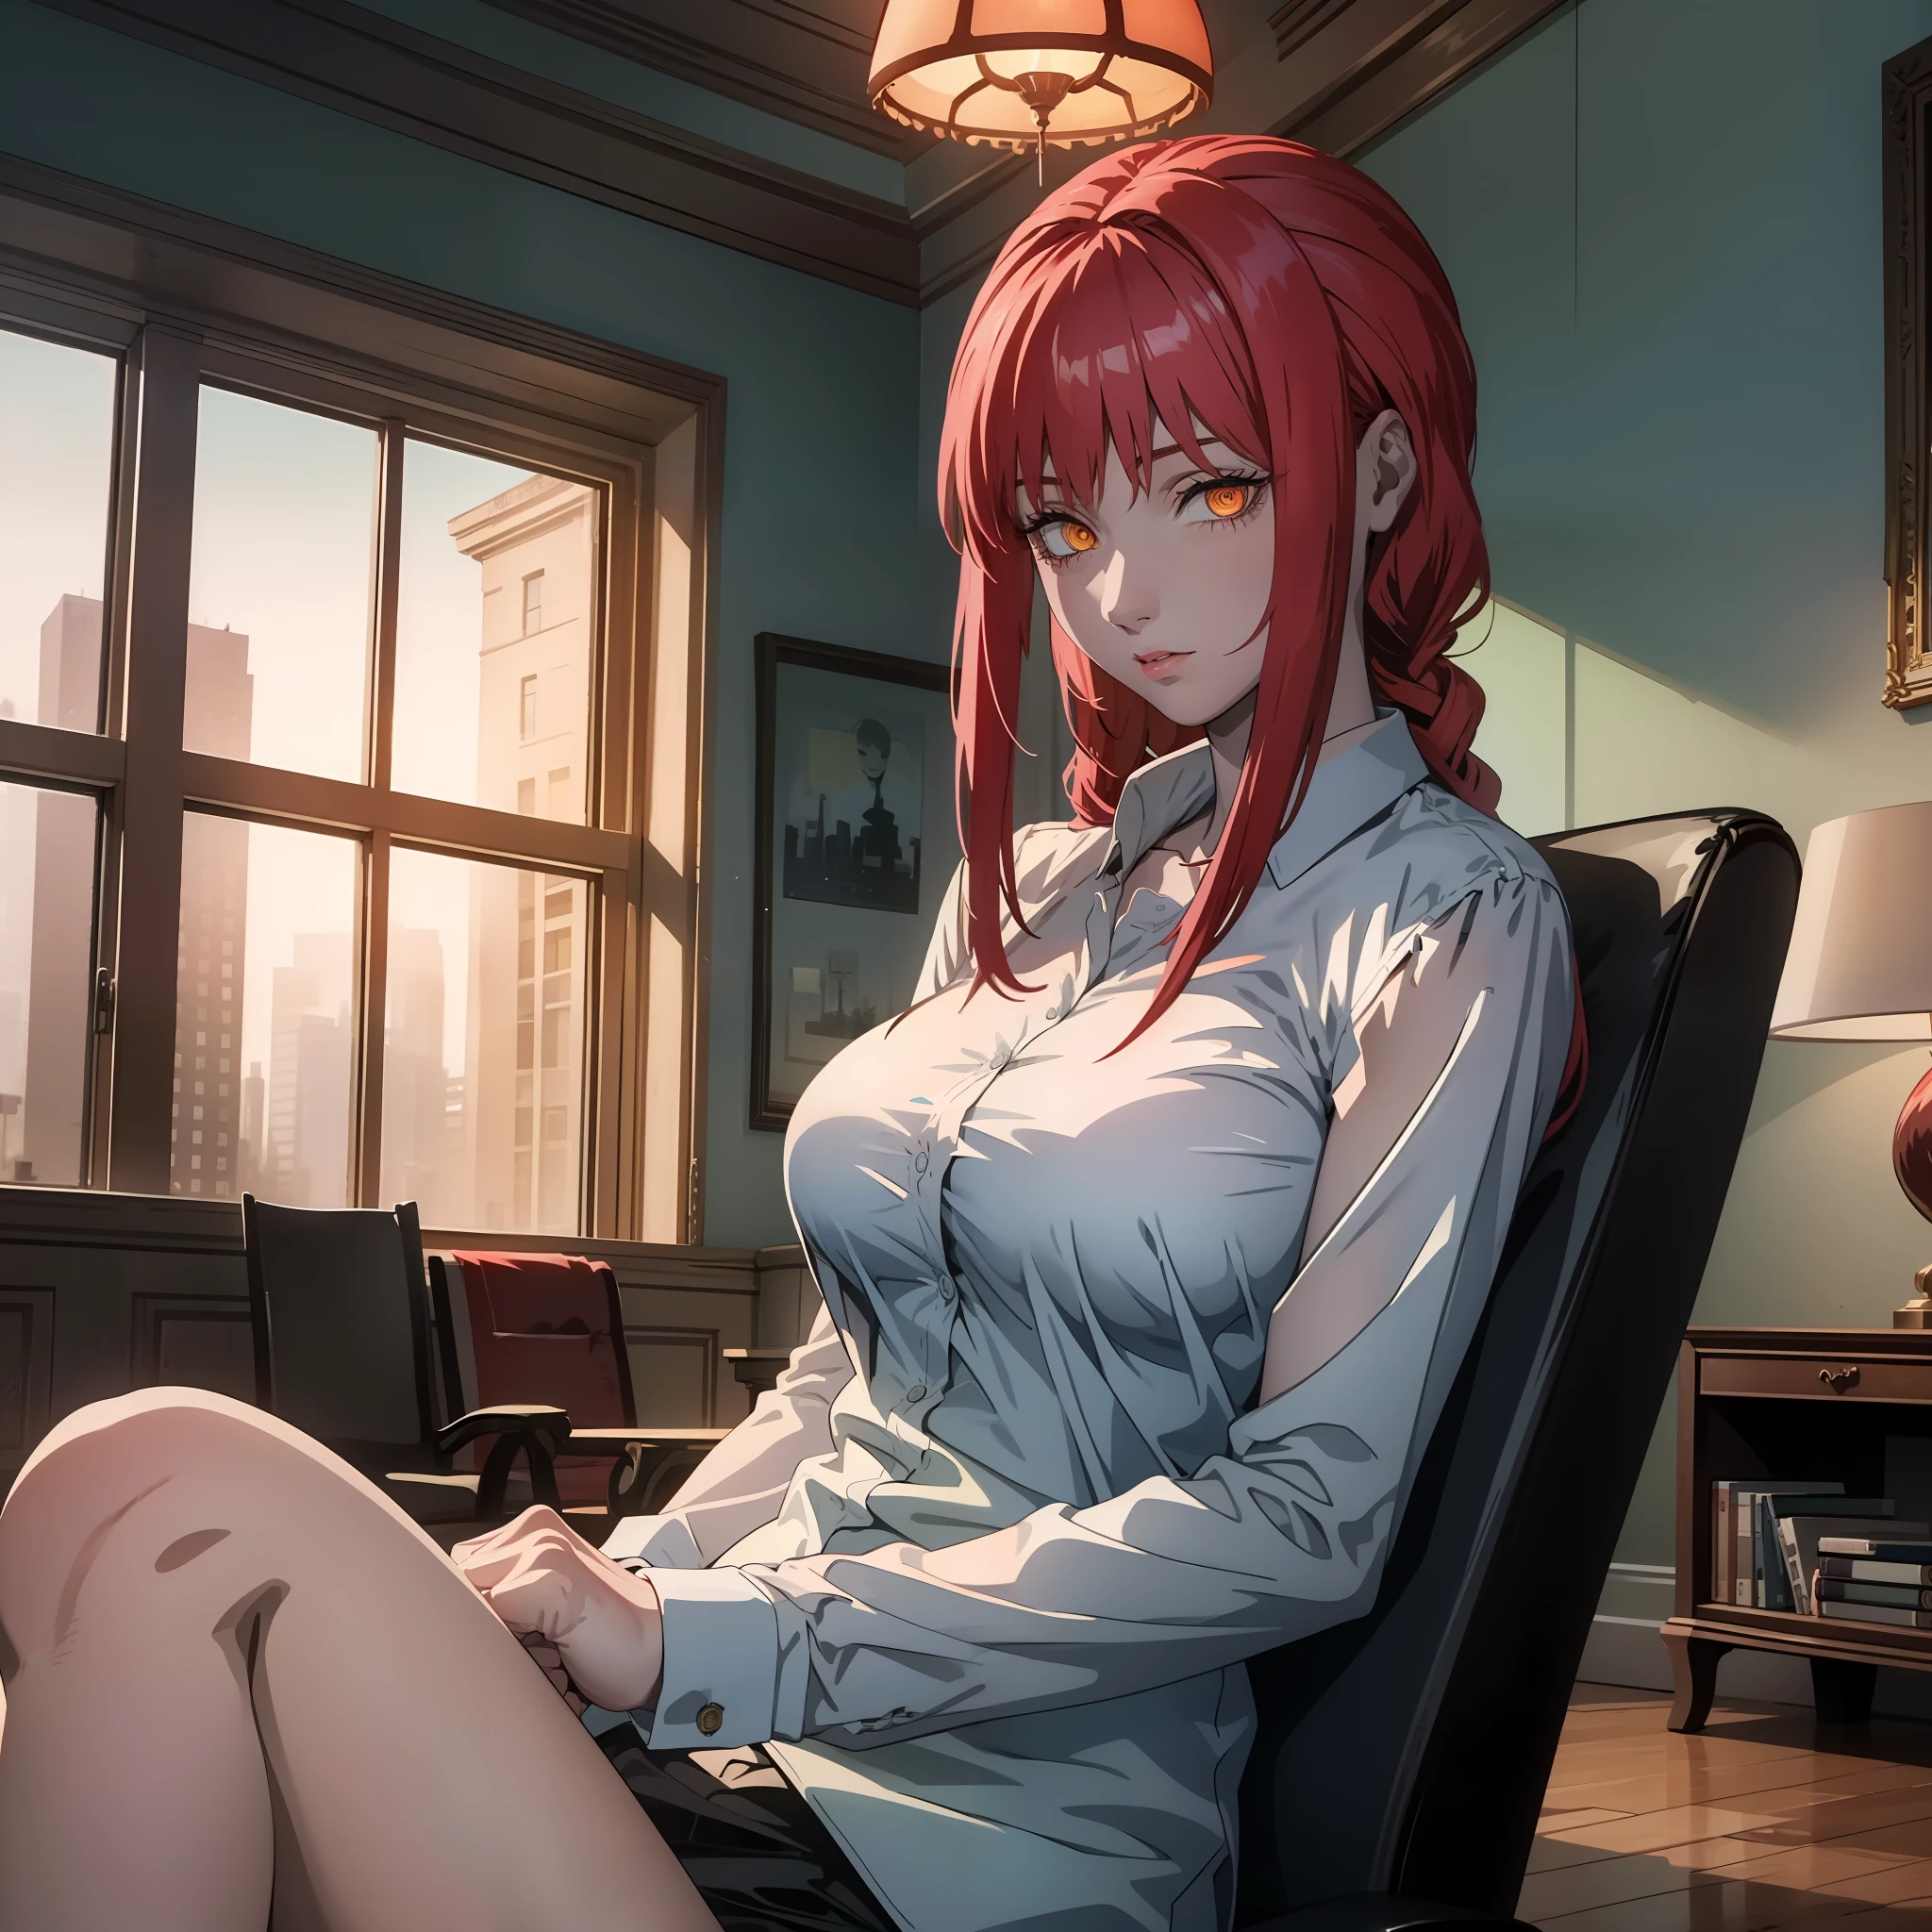 masterpiece, best quality, finely detailed, 1gir 1, (red hair), (bishoujo), cute, (orange eyes), (eyelashes), (huge breasts), (neckline), (white shirt: 1. 2), (open shirt), sitting on sofa, lamp, window, night, delicate interior design, makima, red-haired girl, sexy look, hot, bad girl